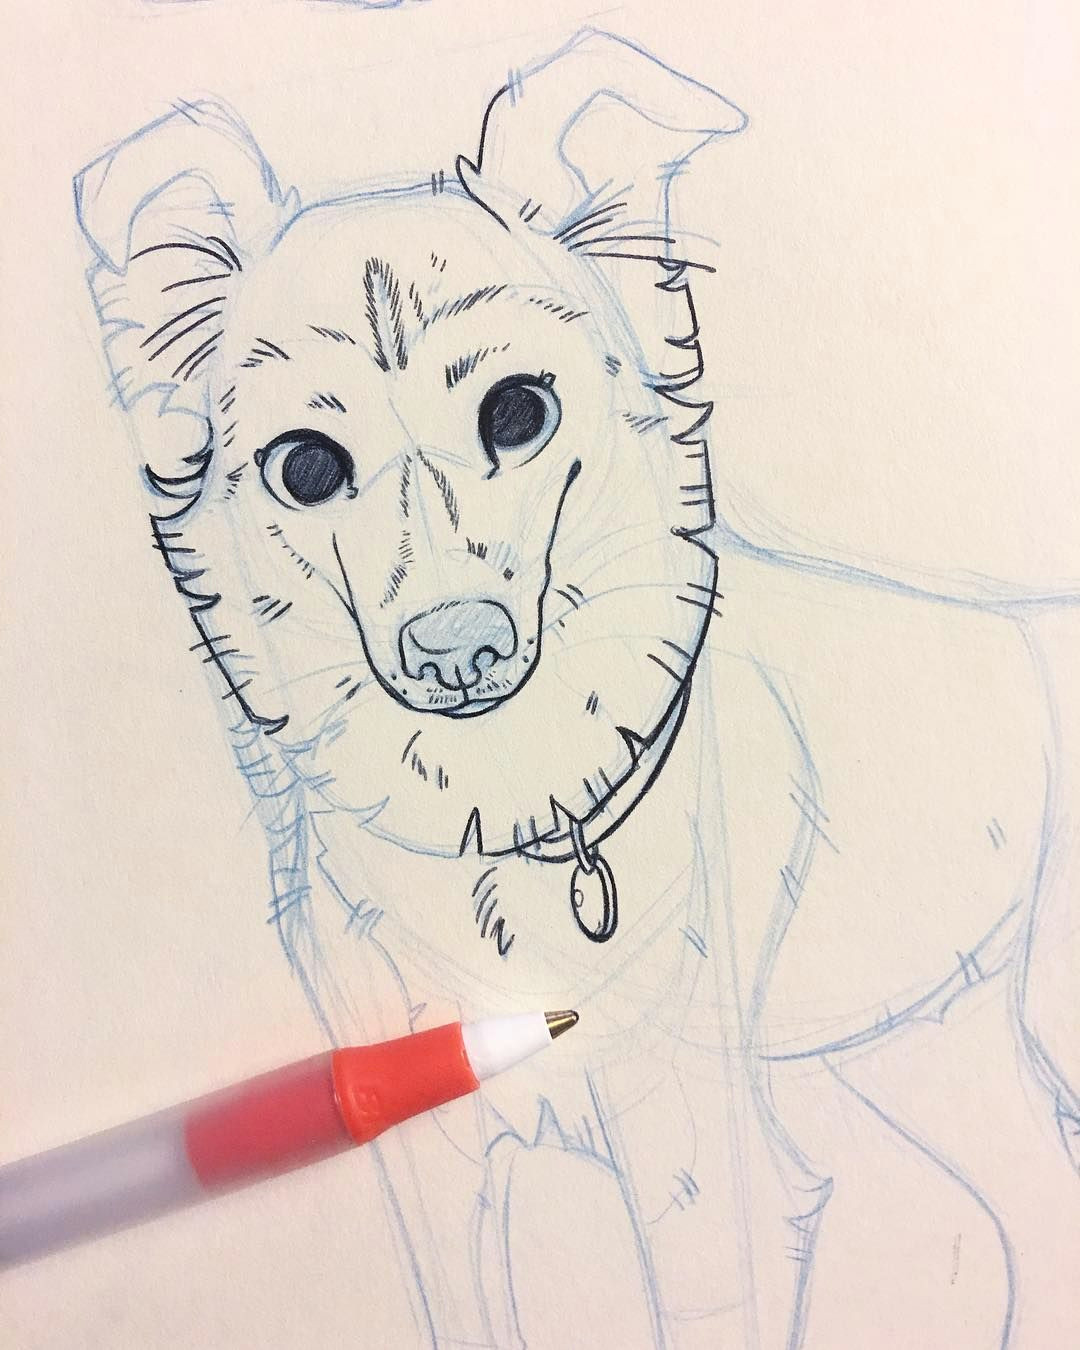 Drawing Dogs Sketch Making Up A New Pet Portrait for Salt Lake City Comic Con This One